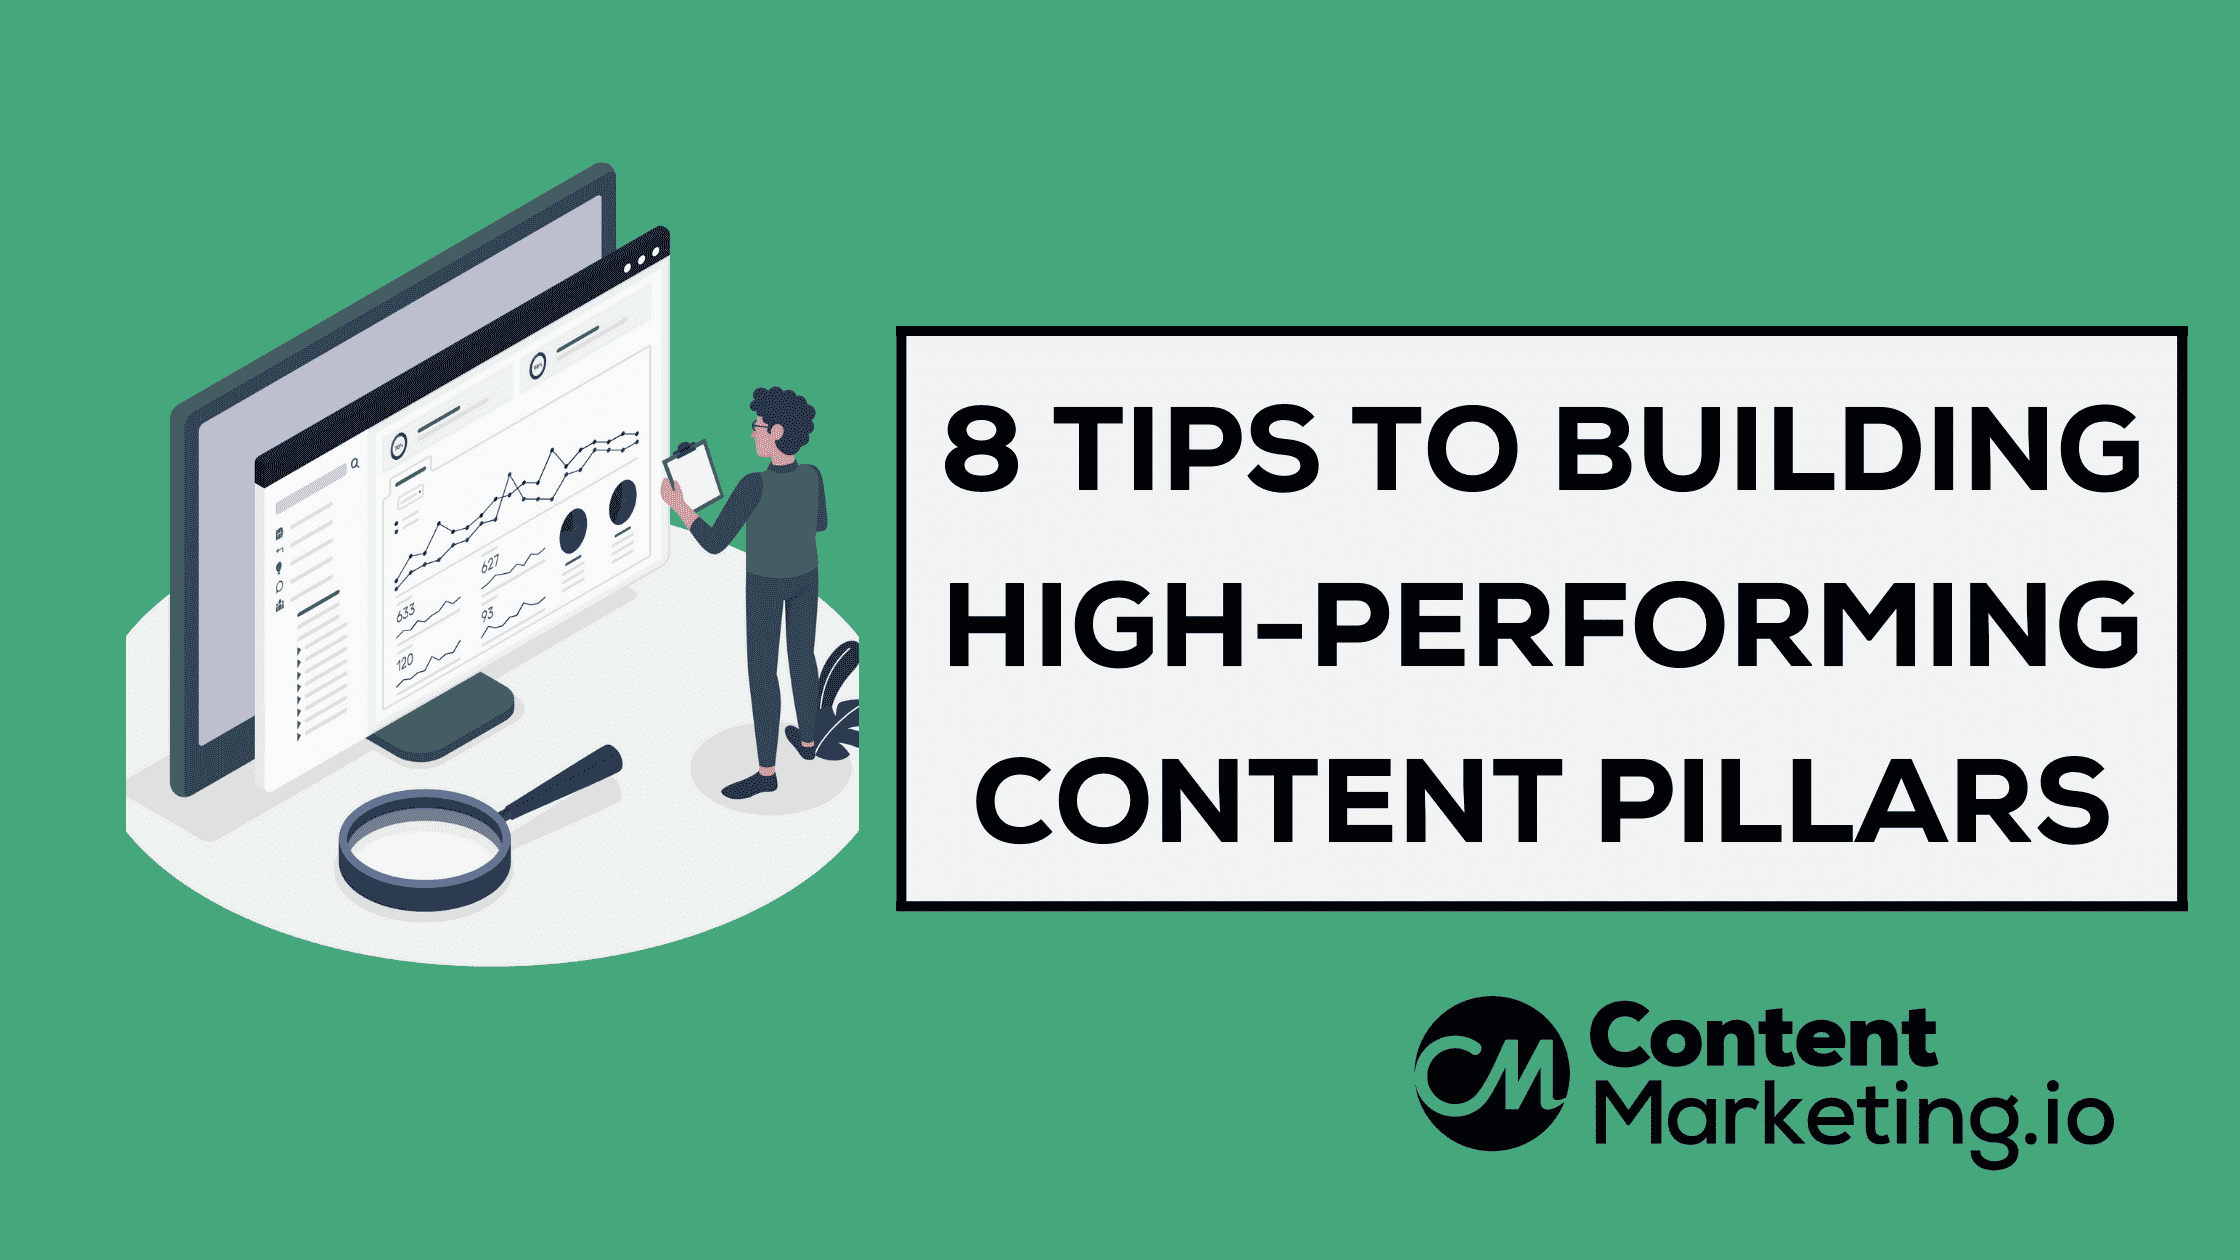 8 Tips to Building High-Performance Content-Pillars